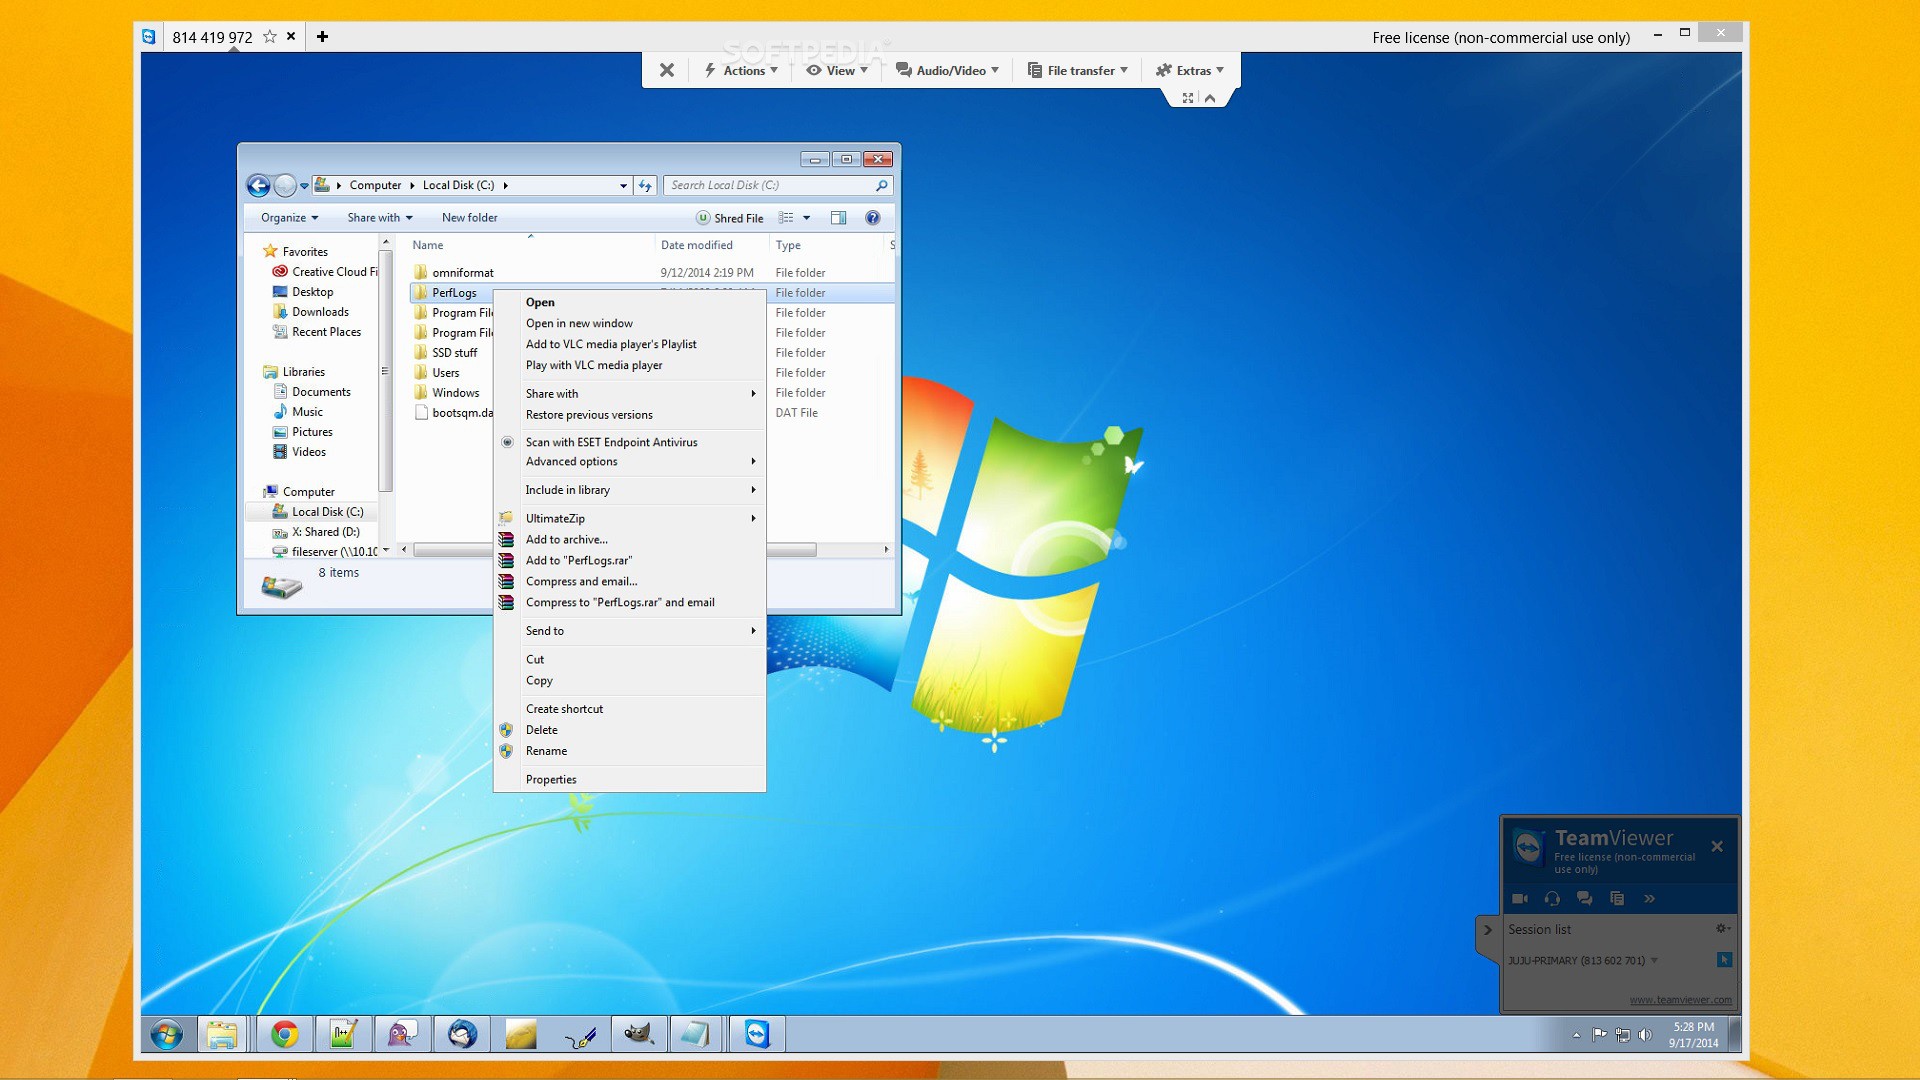 teamviewer 9 free download for windows xp service pack 3